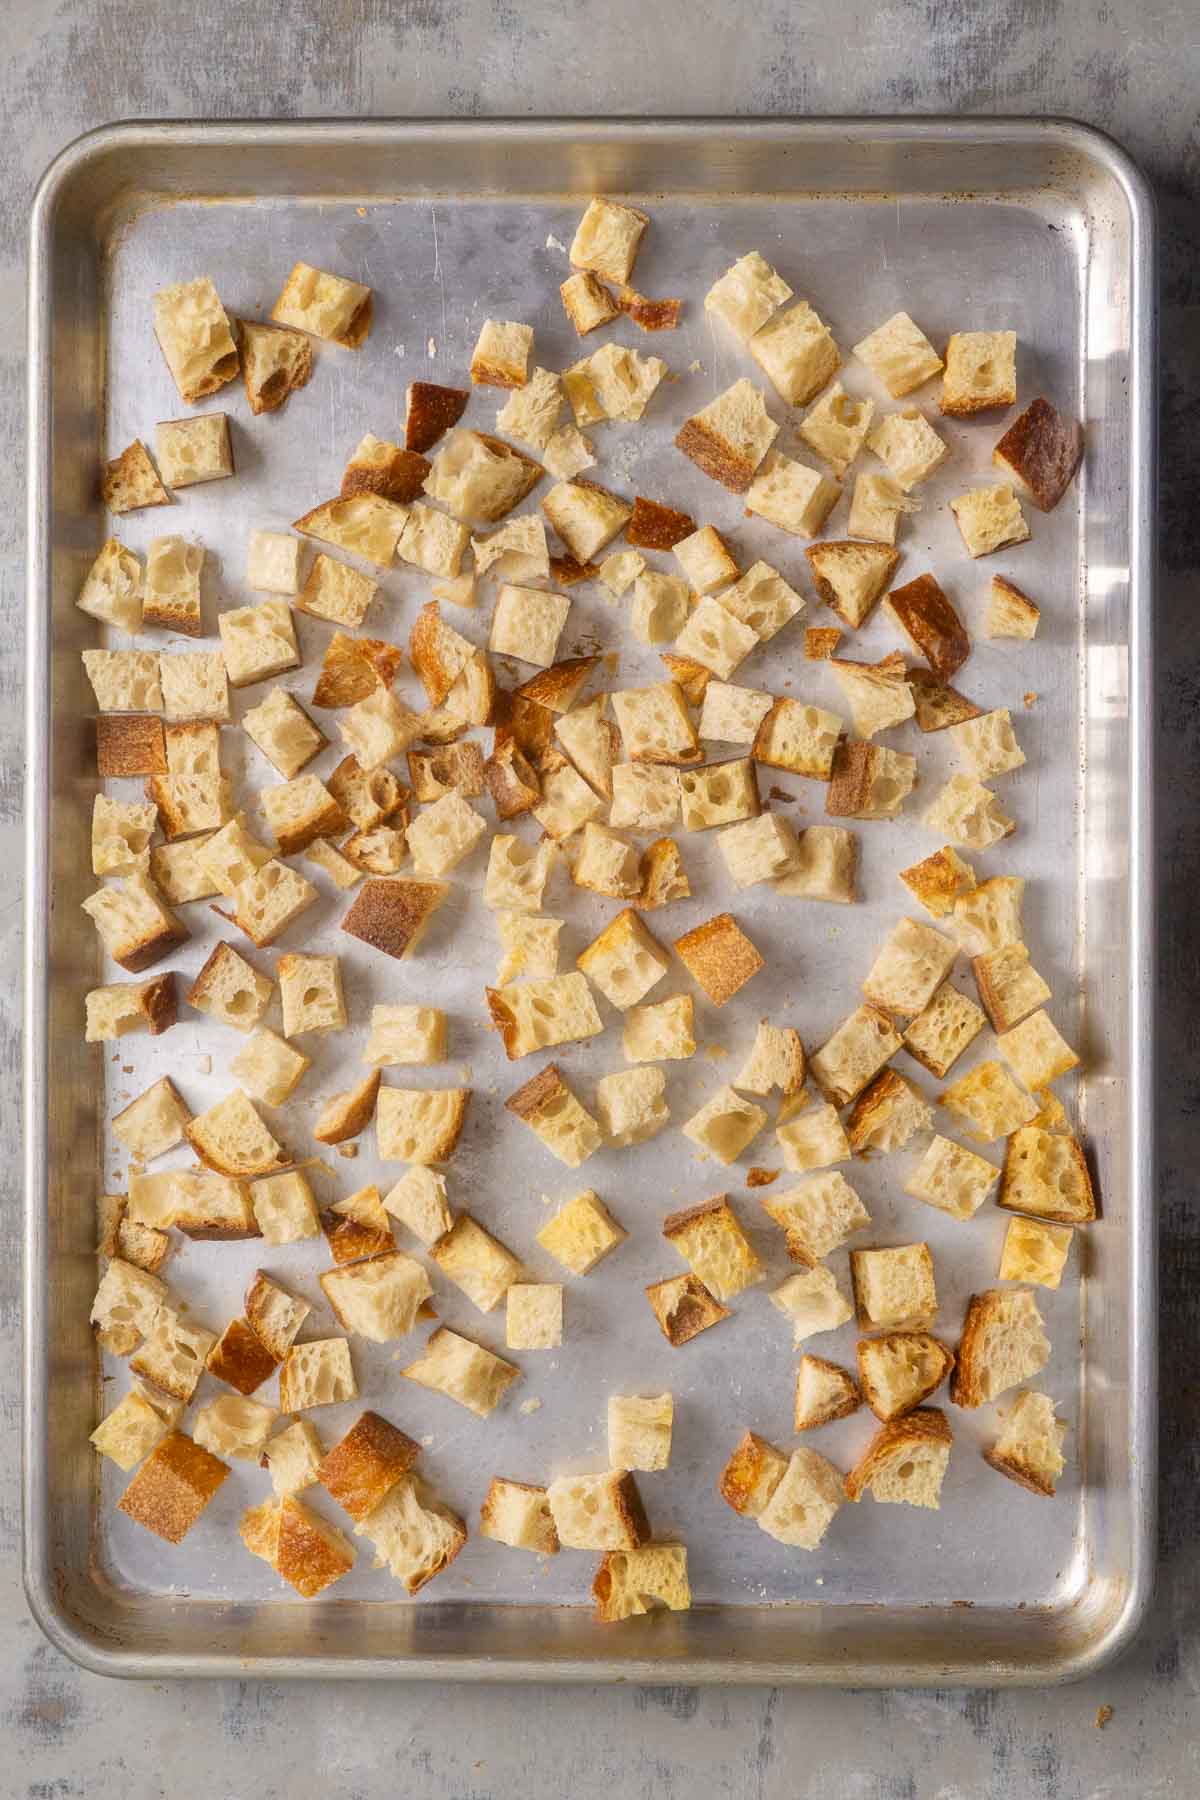 dried bread cubes on baking sheet